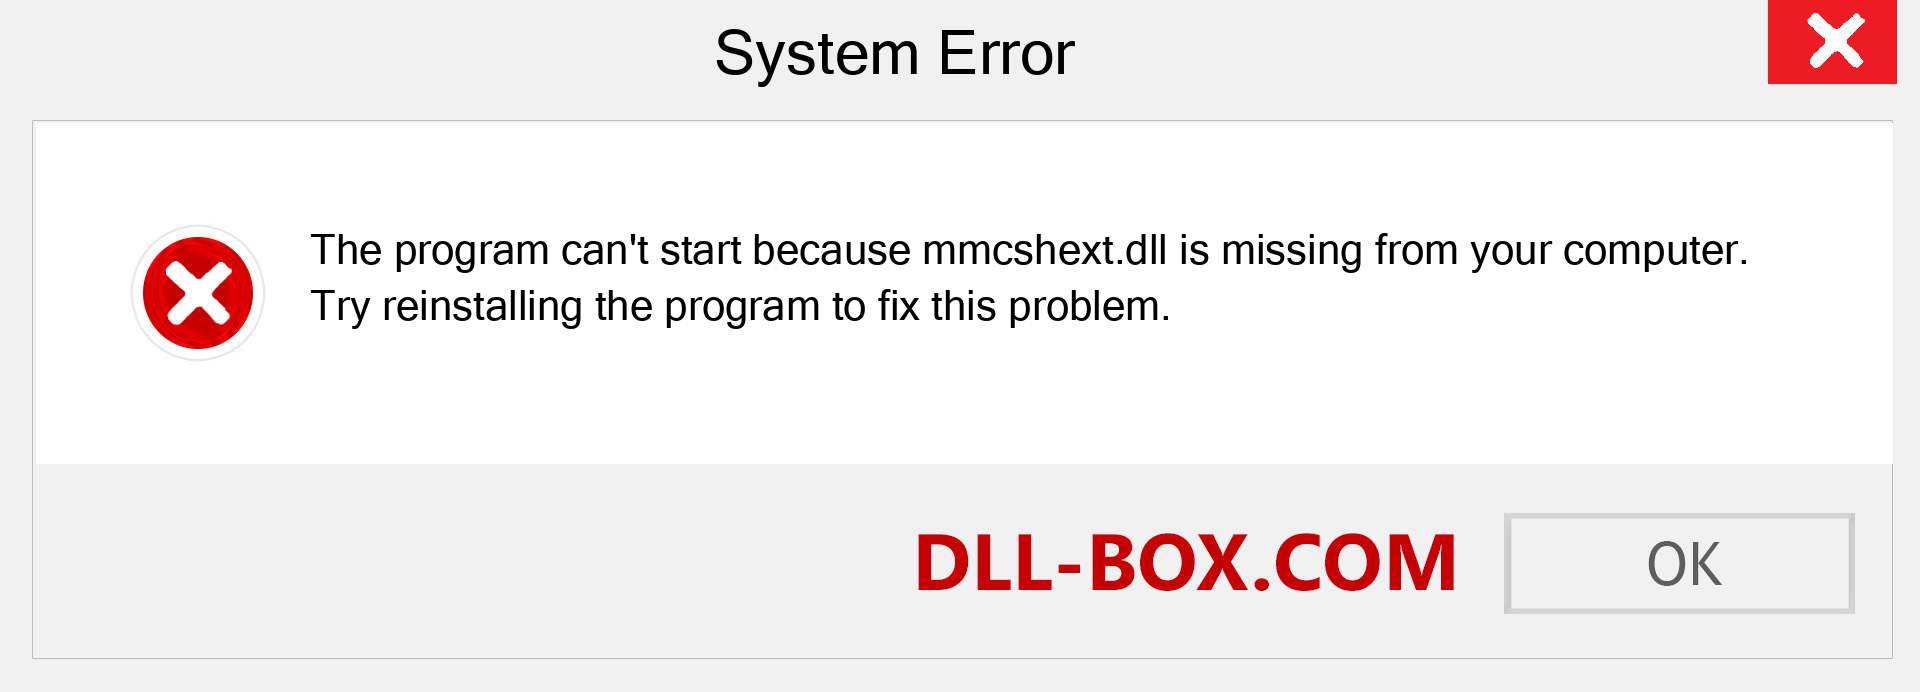  mmcshext.dll file is missing?. Download for Windows 7, 8, 10 - Fix  mmcshext dll Missing Error on Windows, photos, images